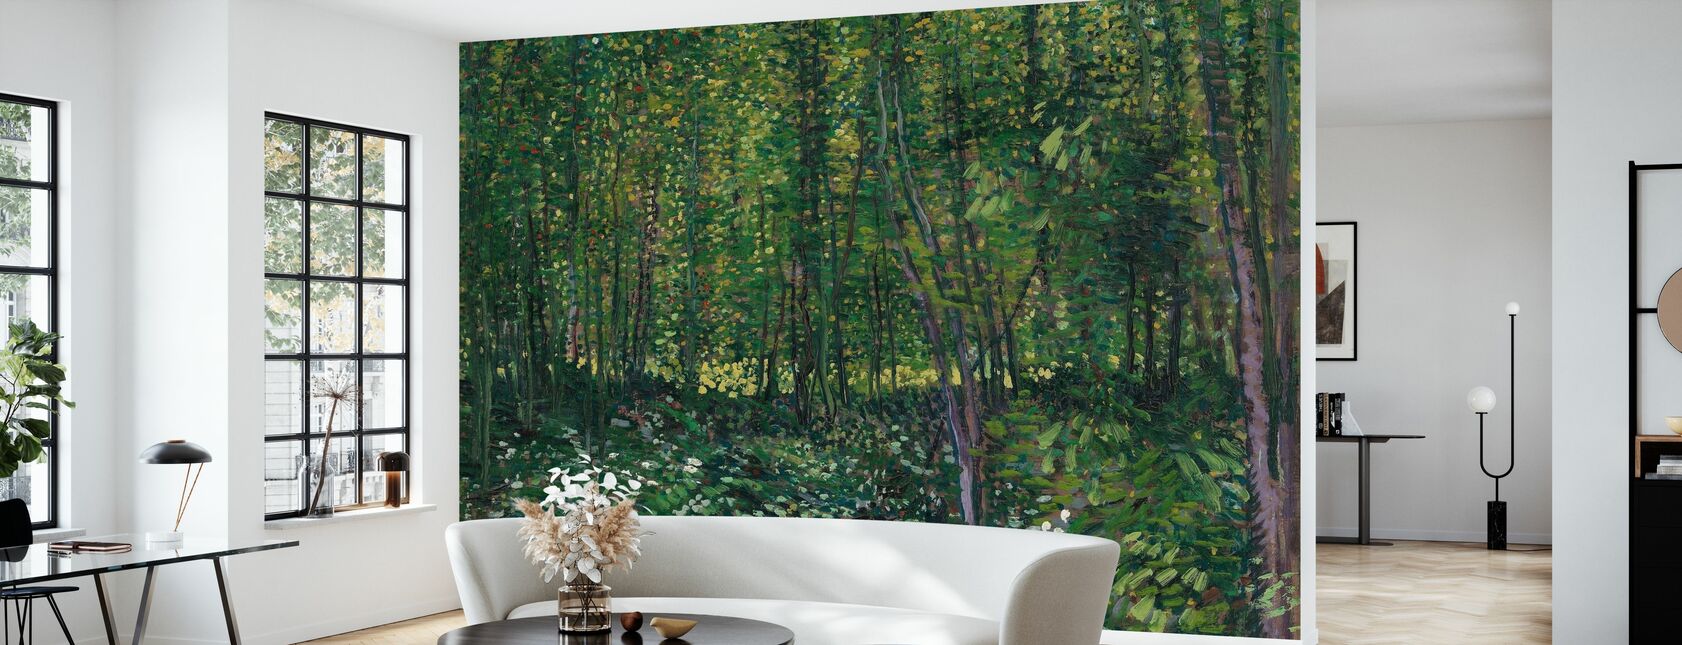 Trees and Undergrowth - Wallpaper - Living Room